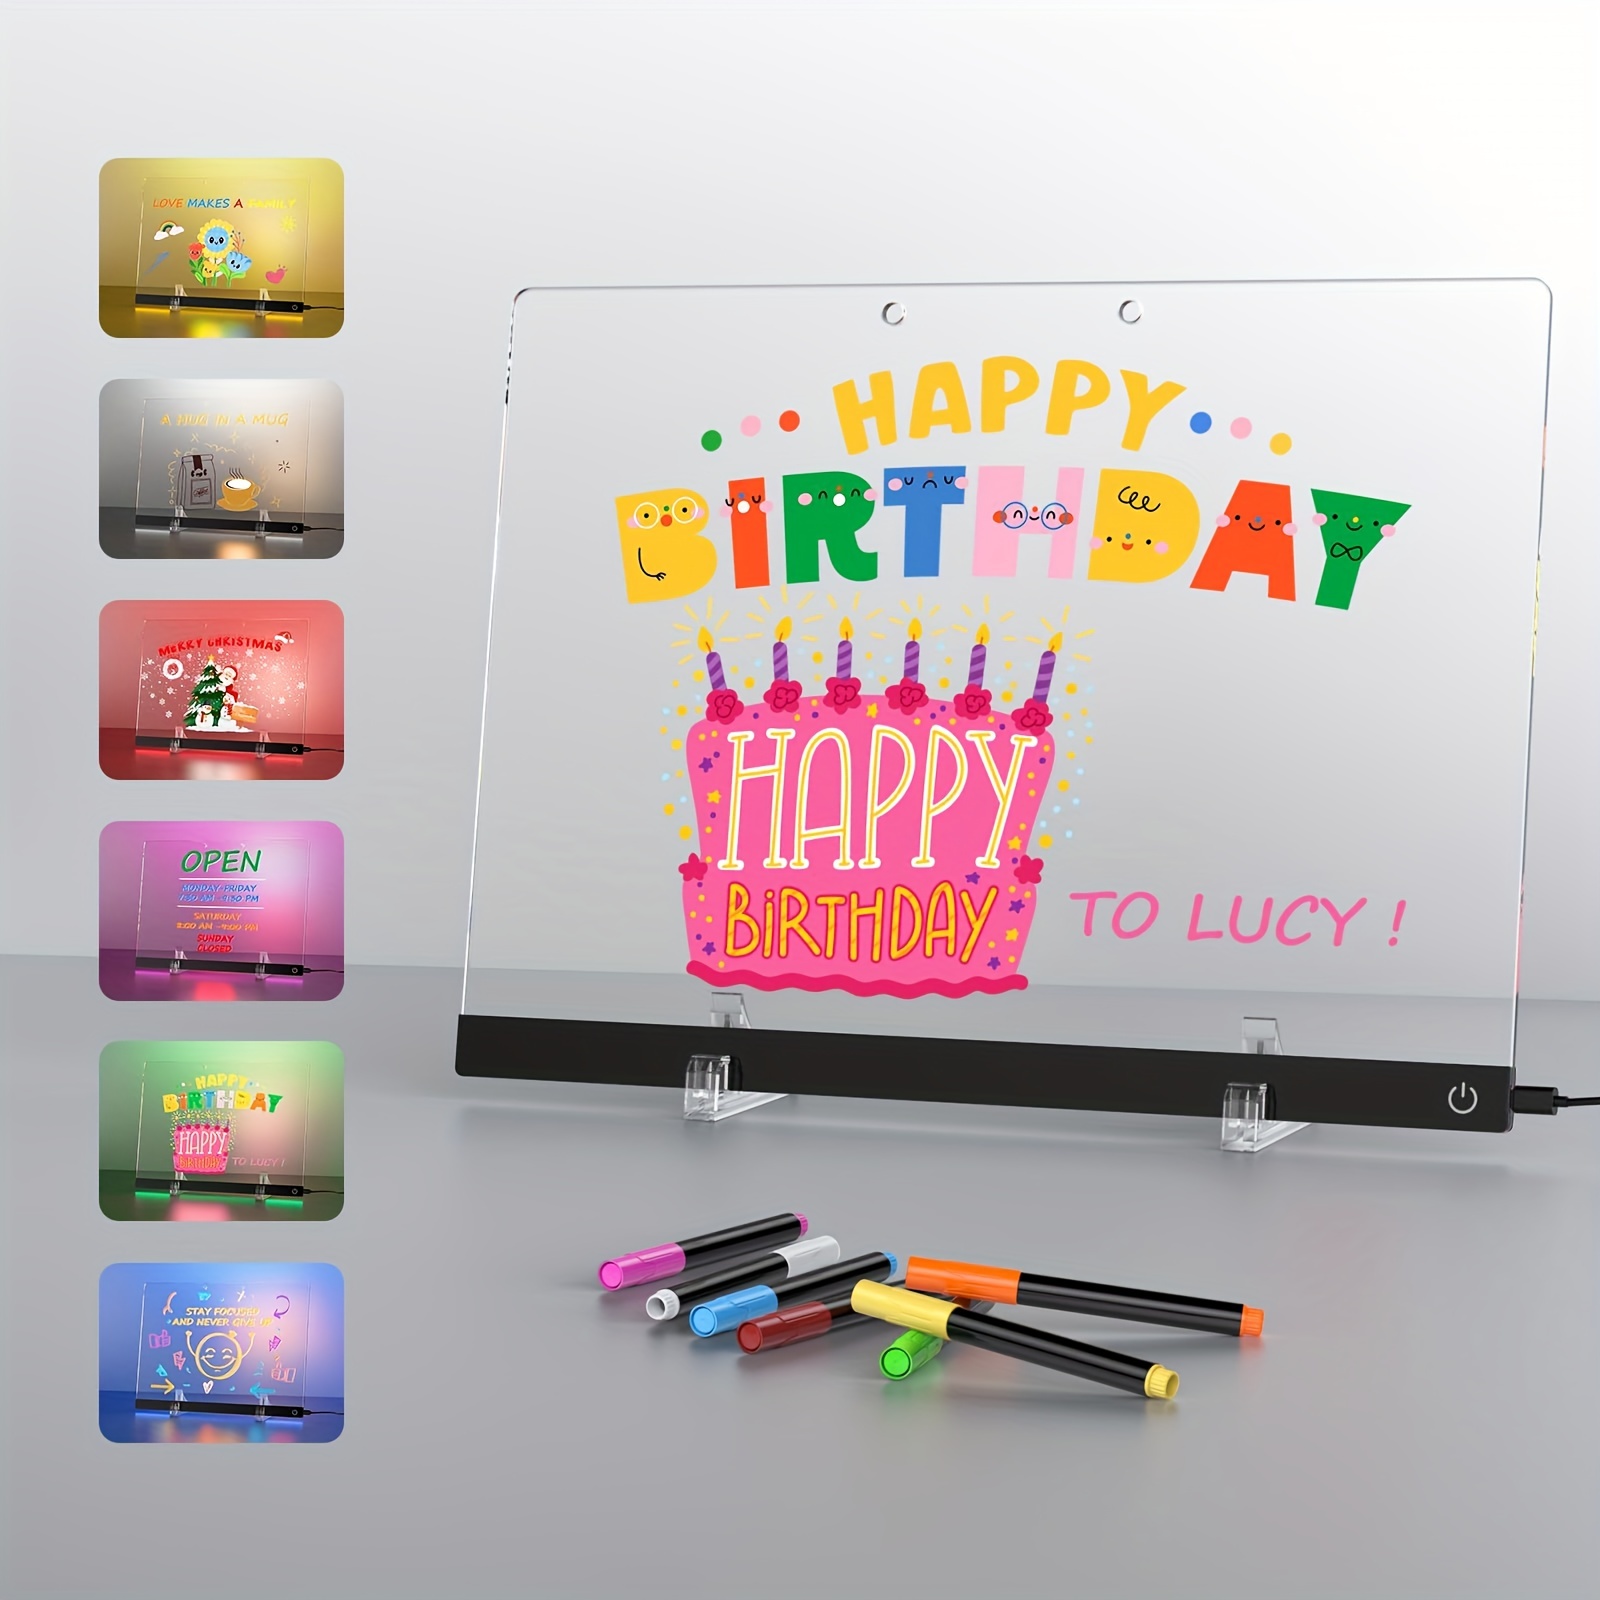 

Acrylic Dry Erase Board With Light, 6 Colors Neon Glow Memo Led Light-up Message Note Board With Stand As Night Light/desk Lamp For Home Store Office Festival Gift (13.8"x10.3", 7 Markers)